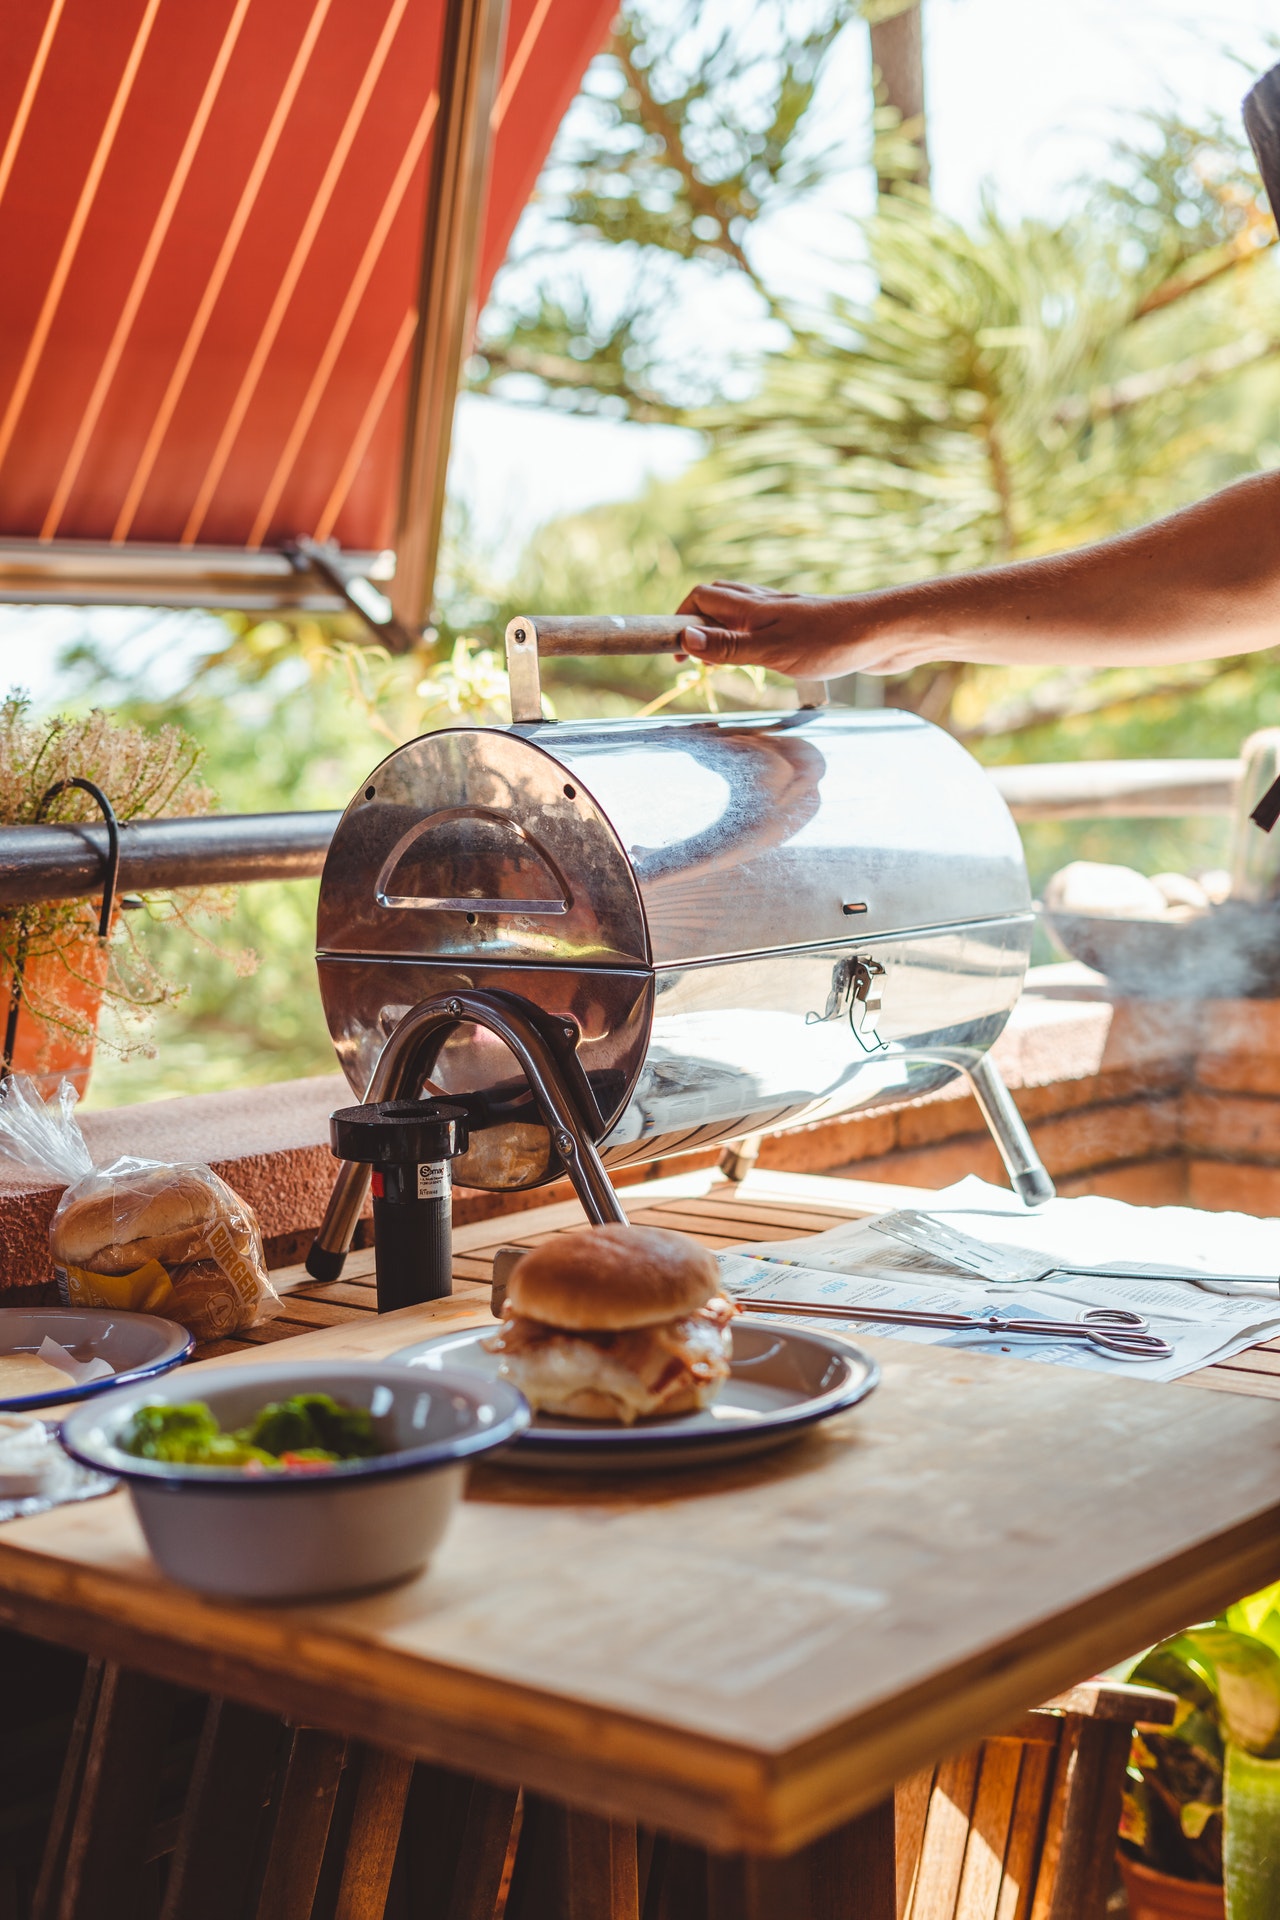 Three ways that Bedsure blankets can make your BBQ more comfortable